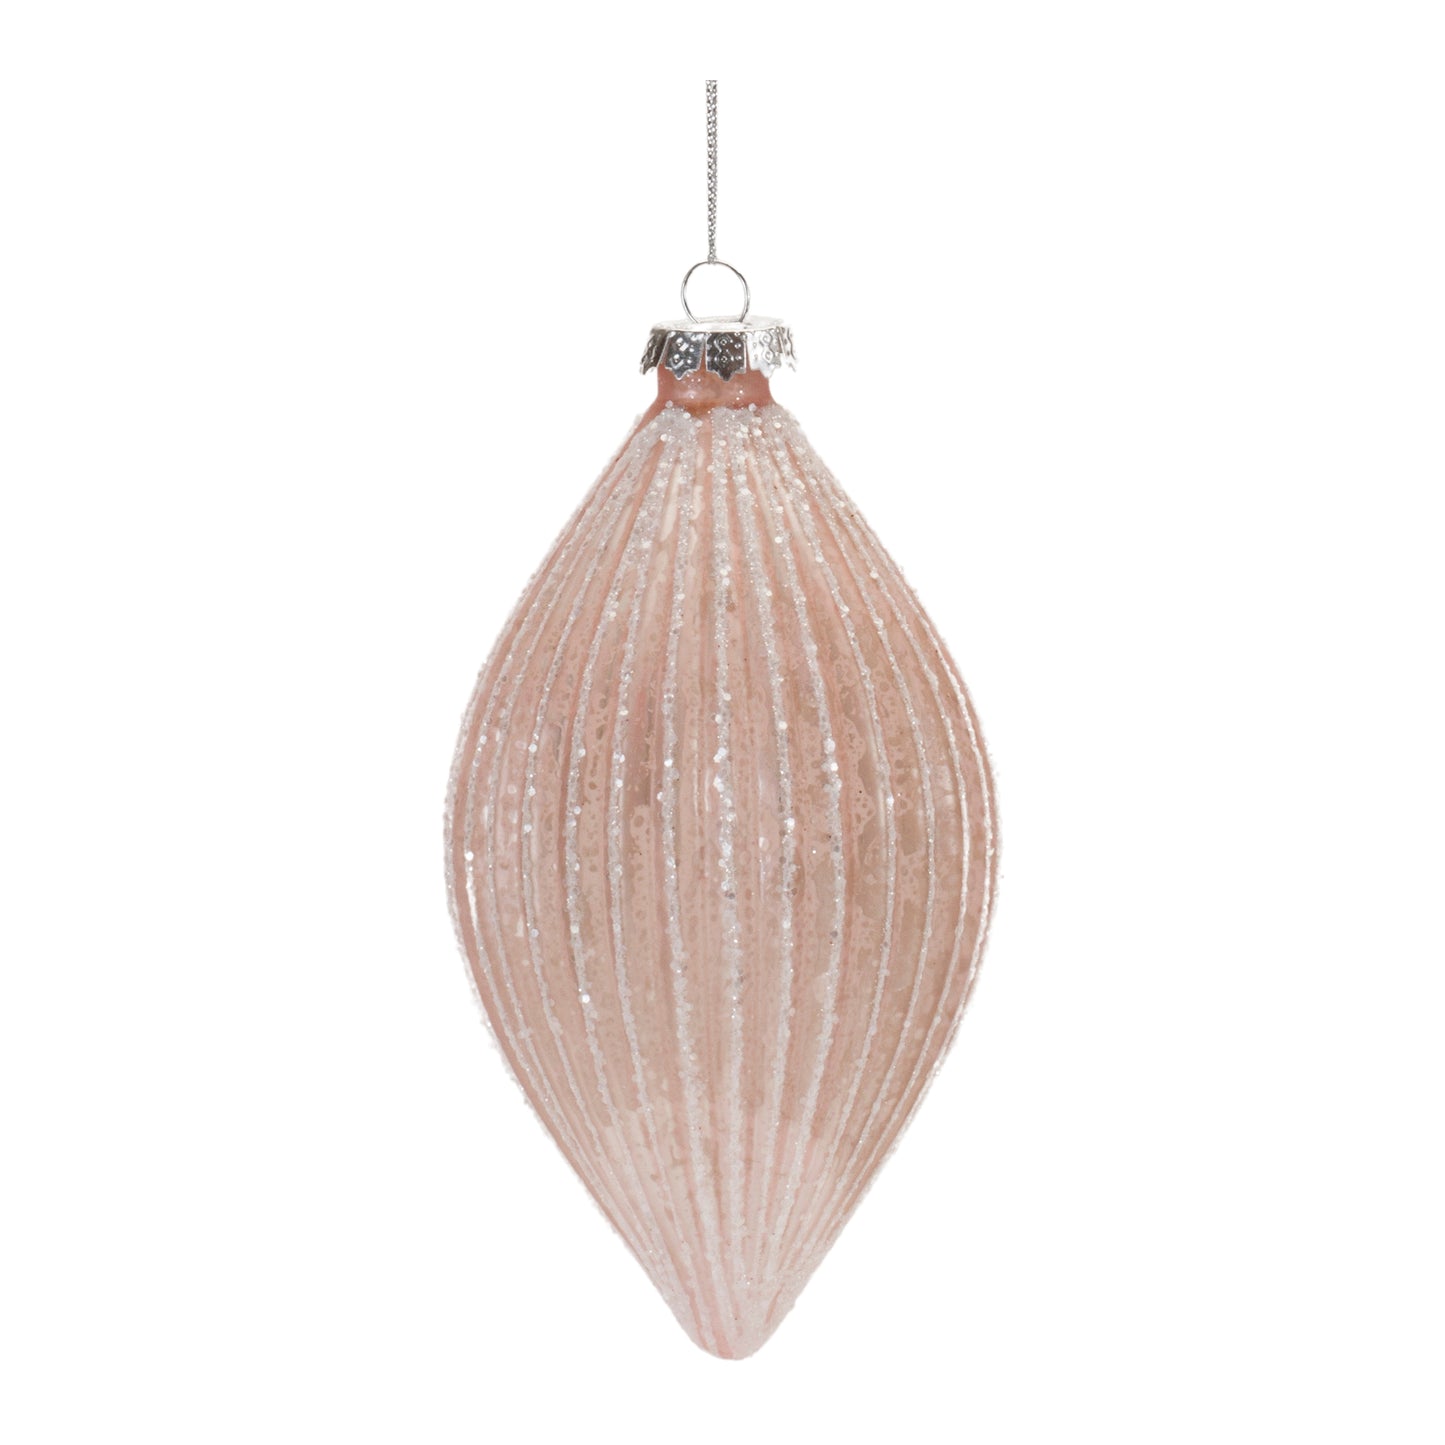 4"D, 4"H, or 6"H Pink Glamour Glass Ornament